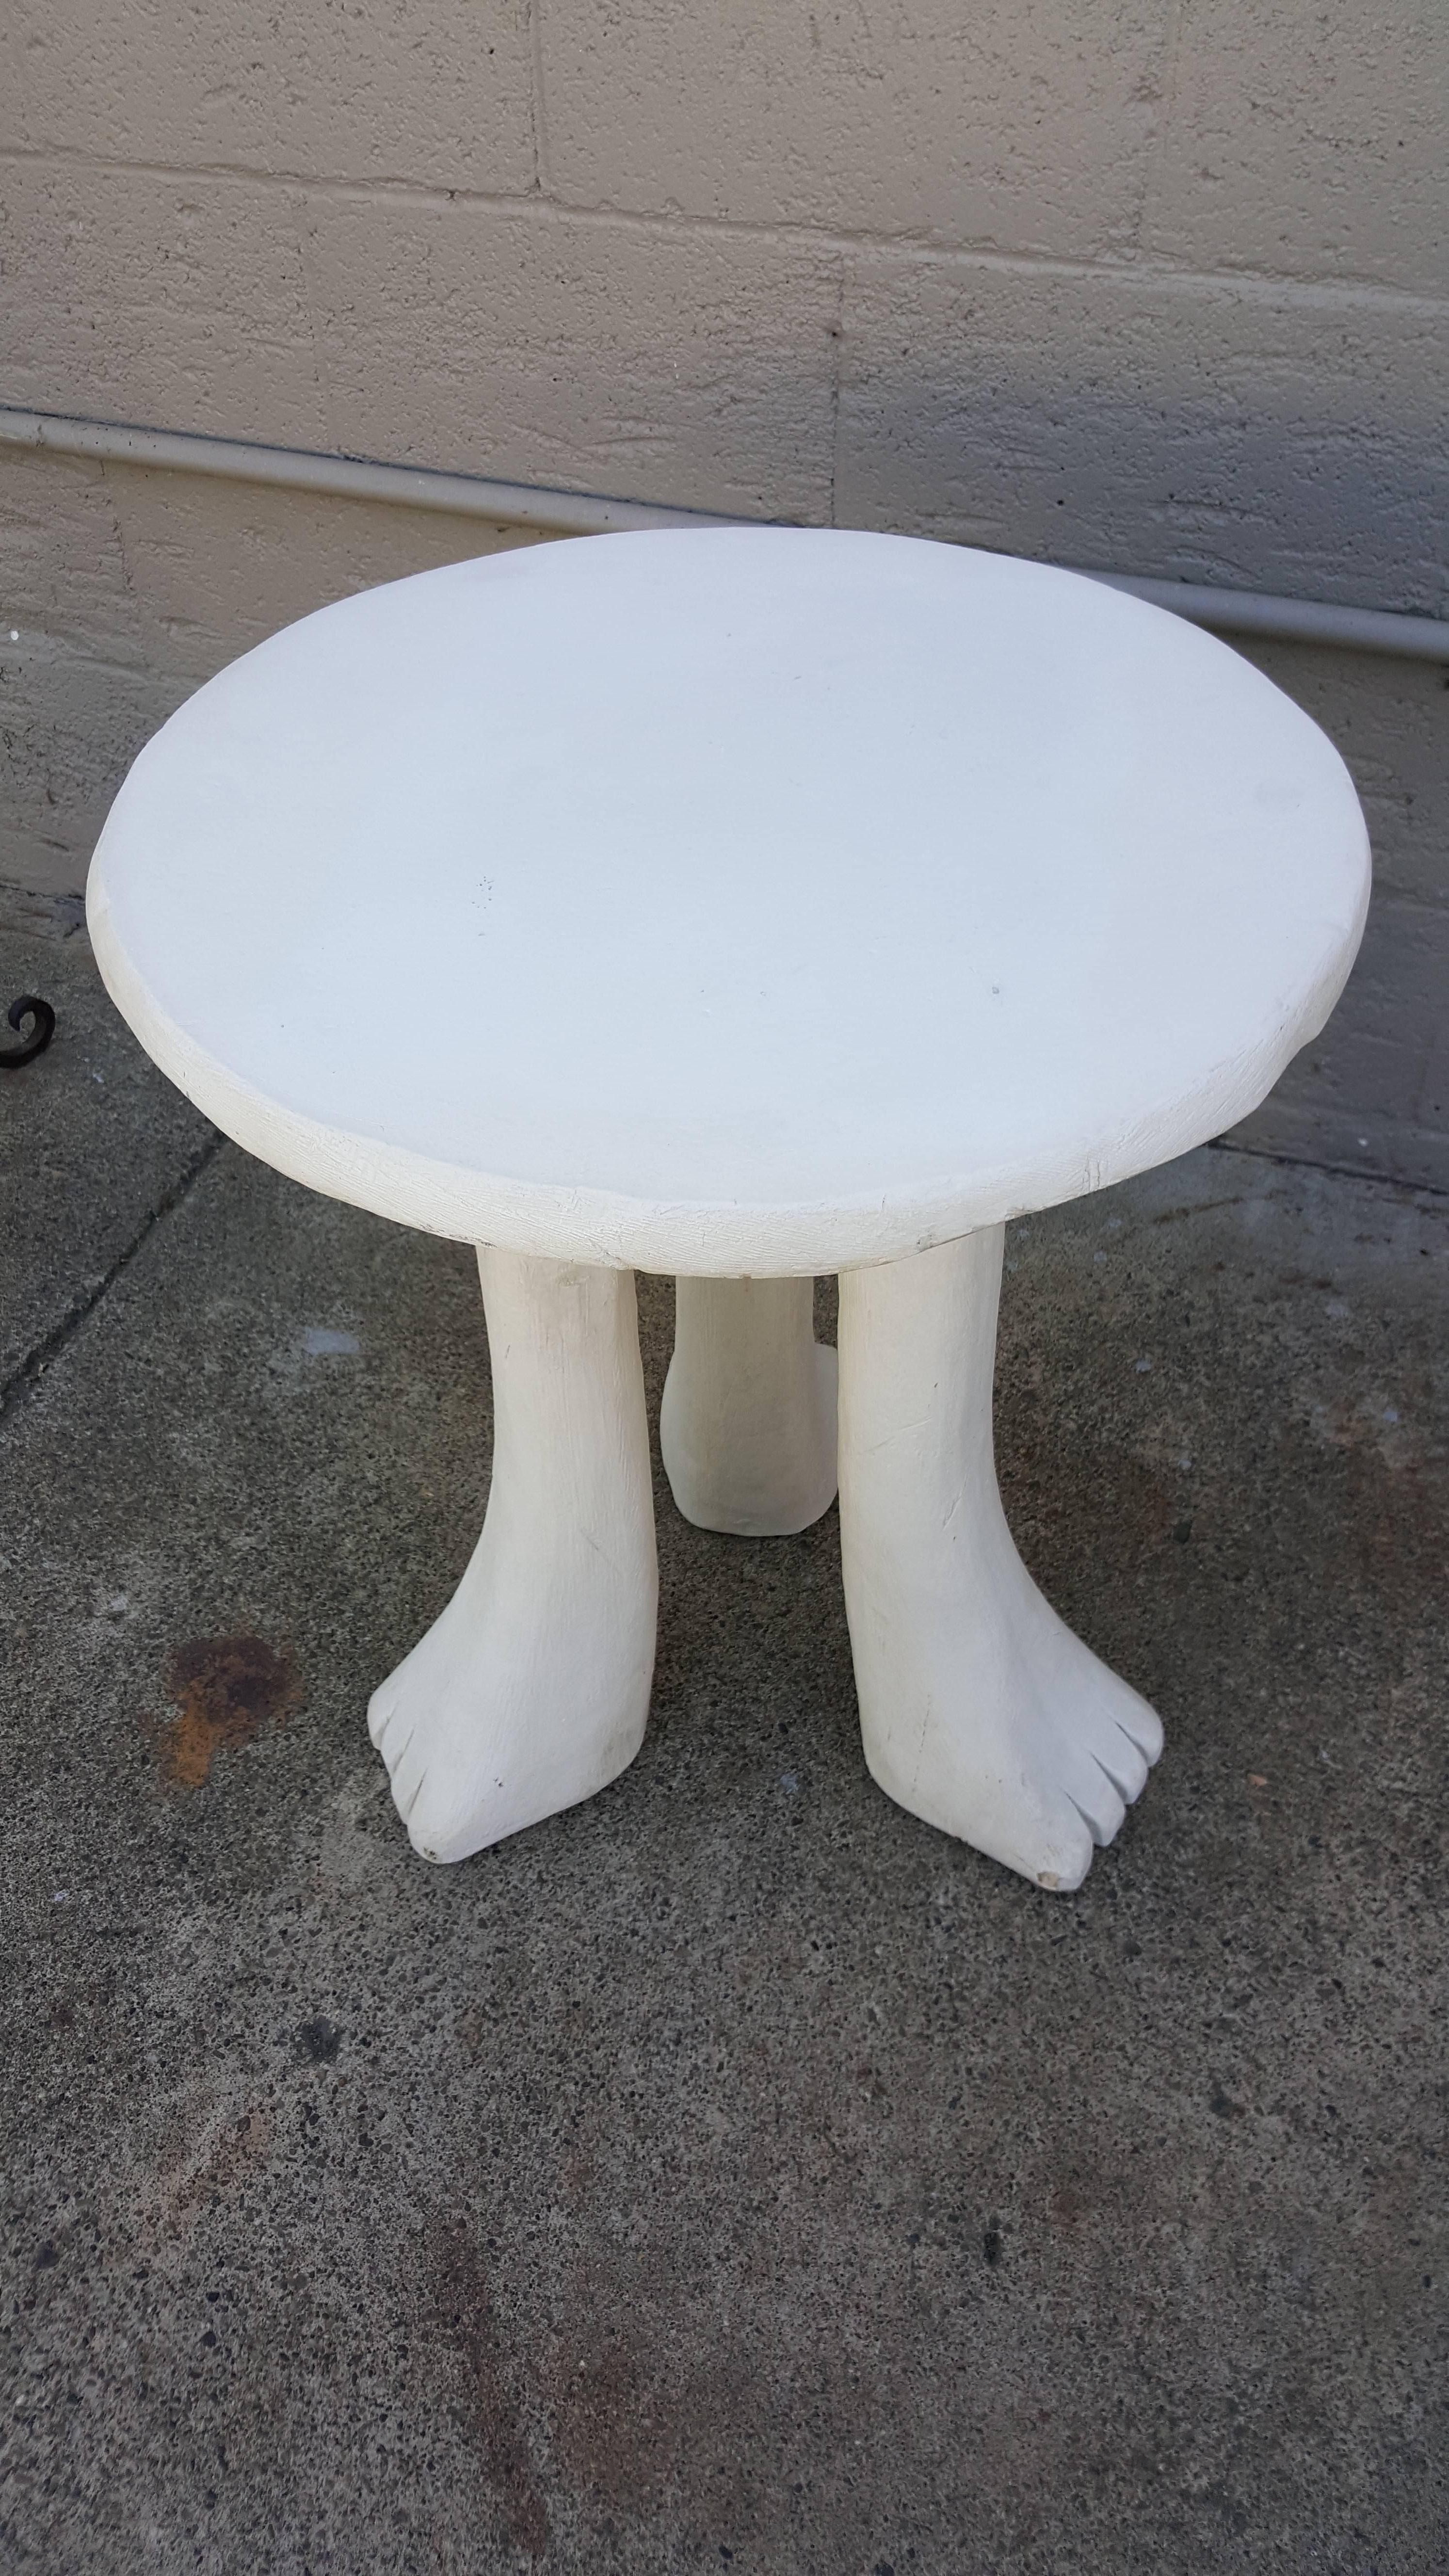 1970s painted cement and plaster "Africa" end table designed by John Dickinson. Large version measuring 25.75 inches H. Dickinson grew up in Berkeley and went to Parsons School of Design. He returned to San Francisco in 1956 and launched